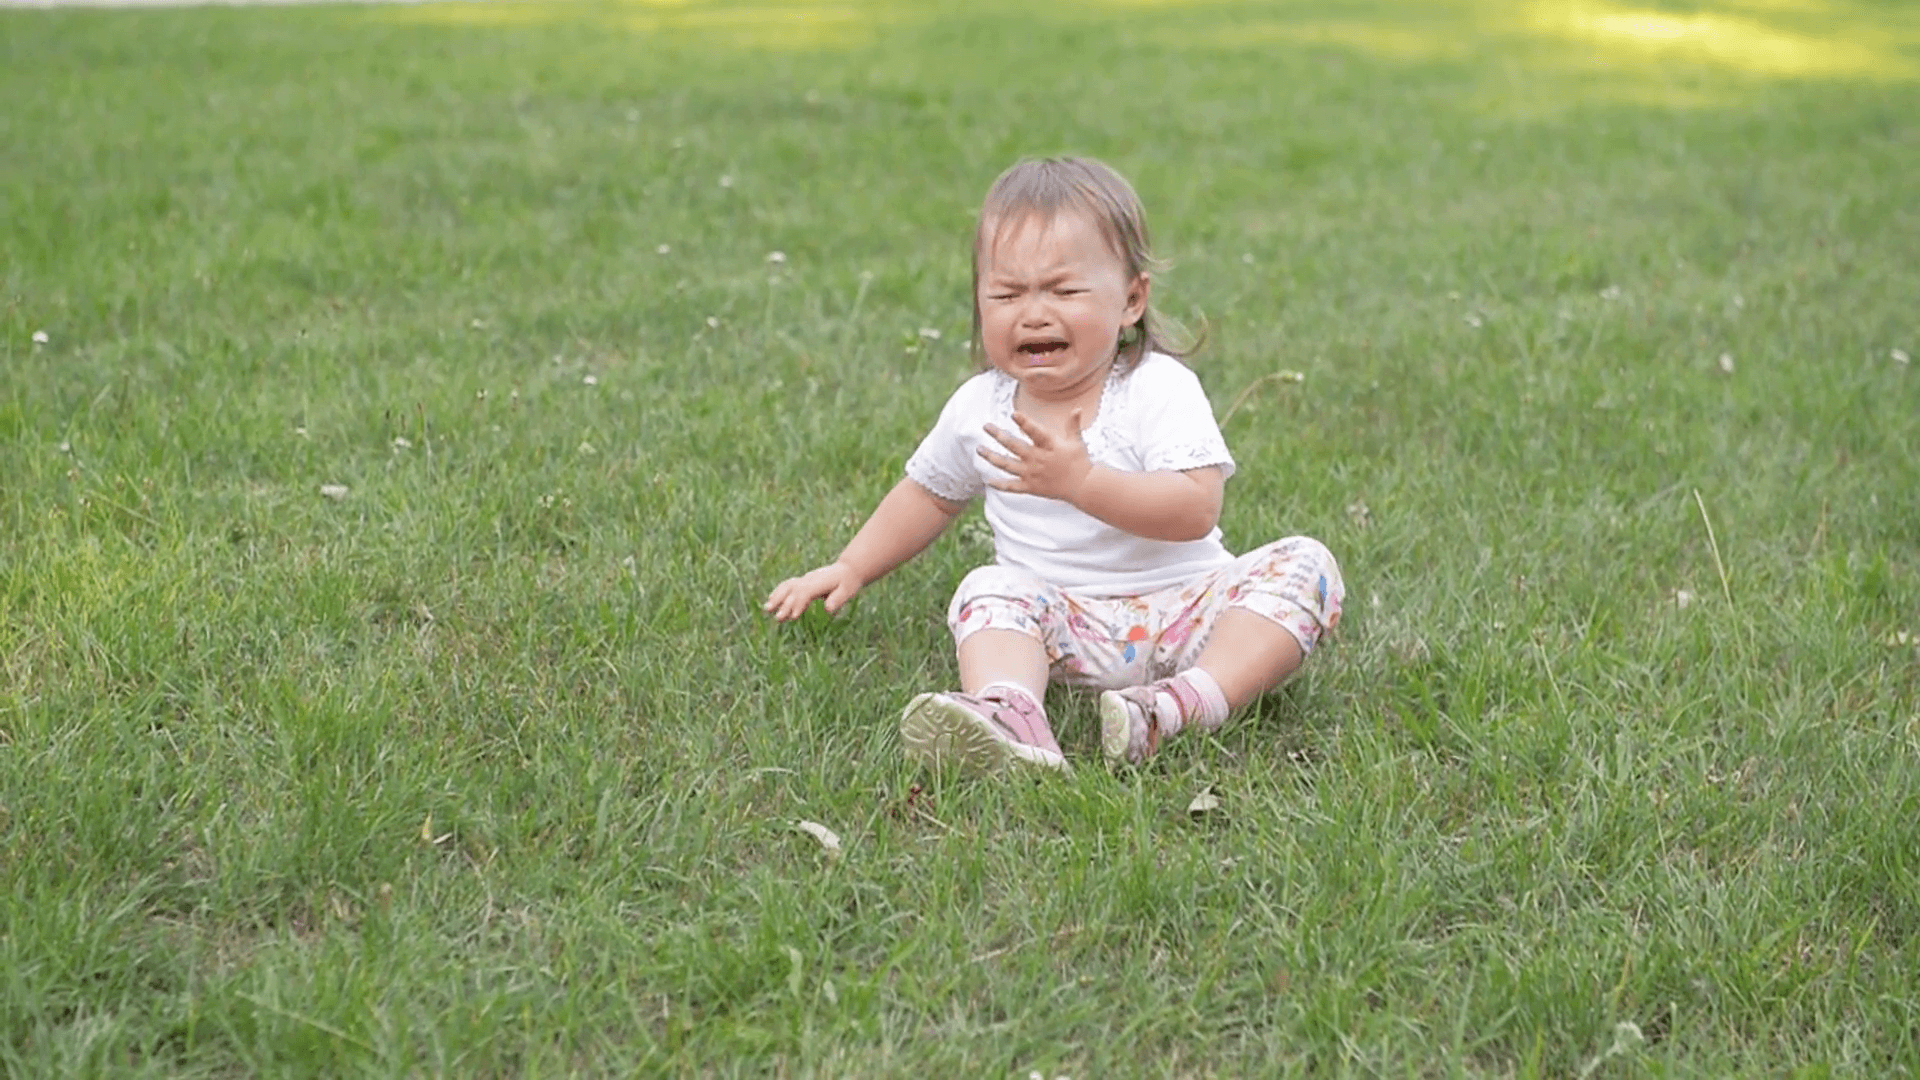 Children crying on green grass background, Small baby girl